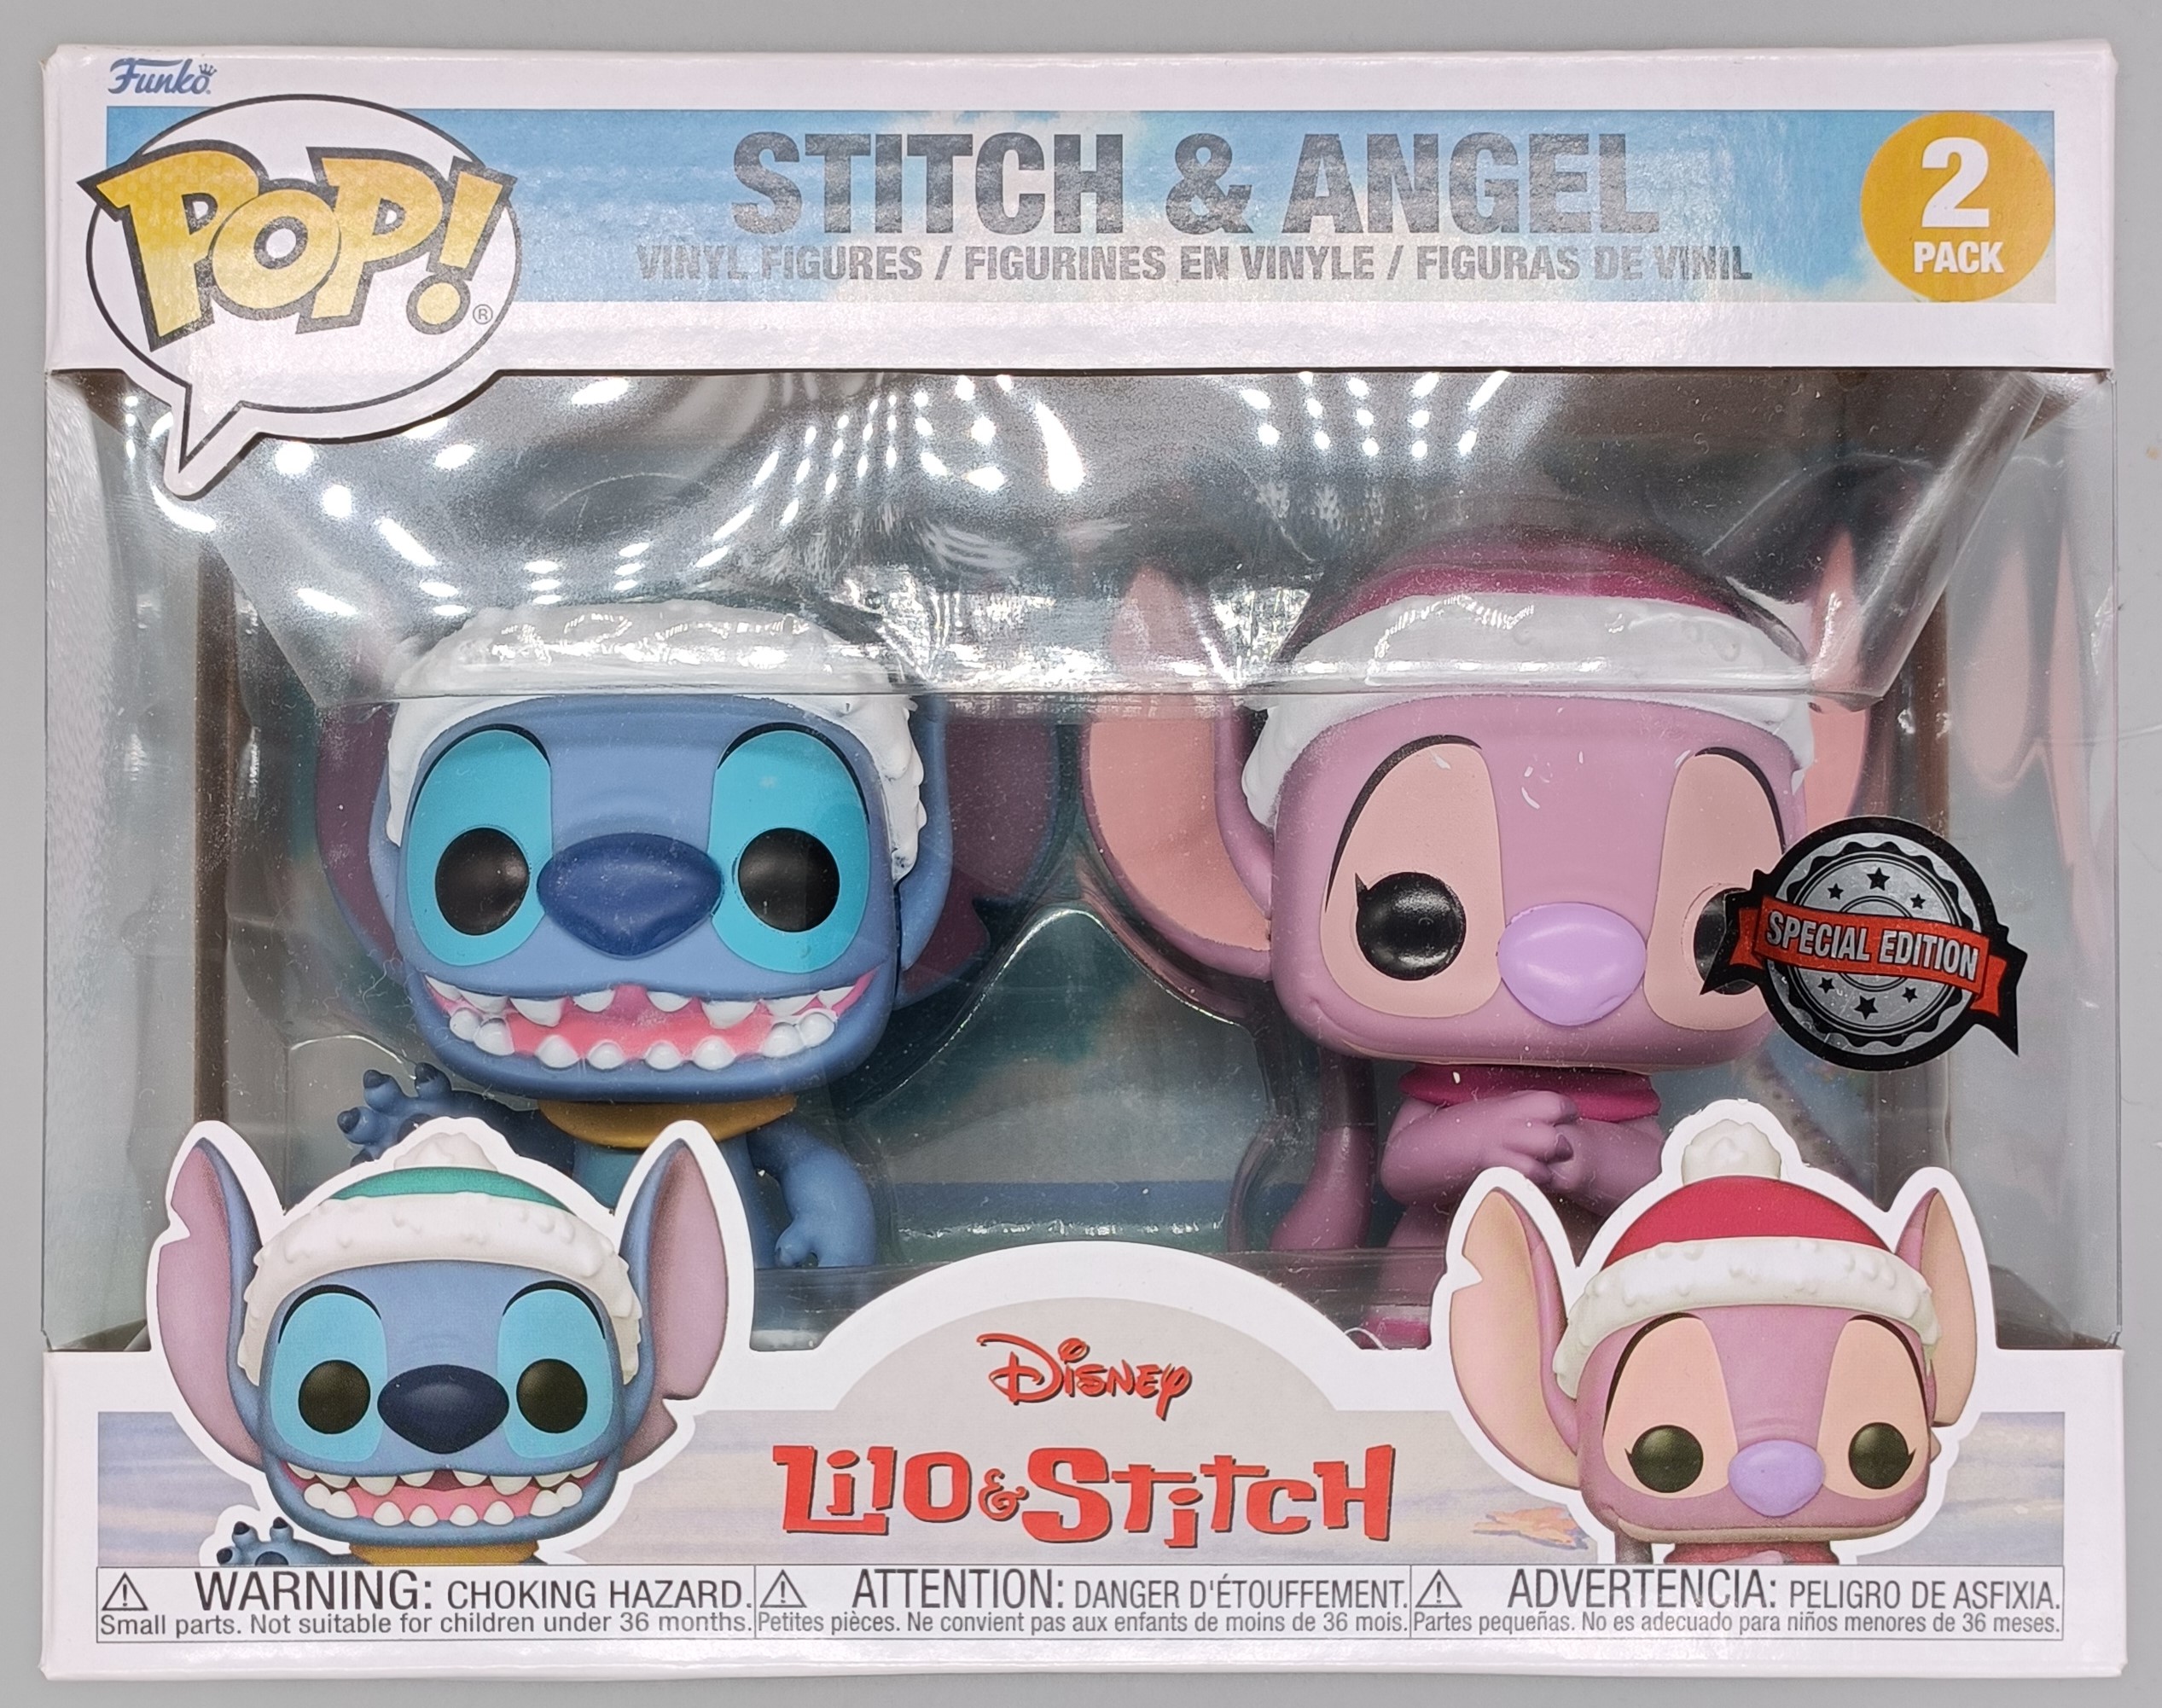 https://www.gamexchange.co.uk/images/pictures/products/funko-pop-3/2pk-stitch-angel.jpg?v=7a0dd3b1